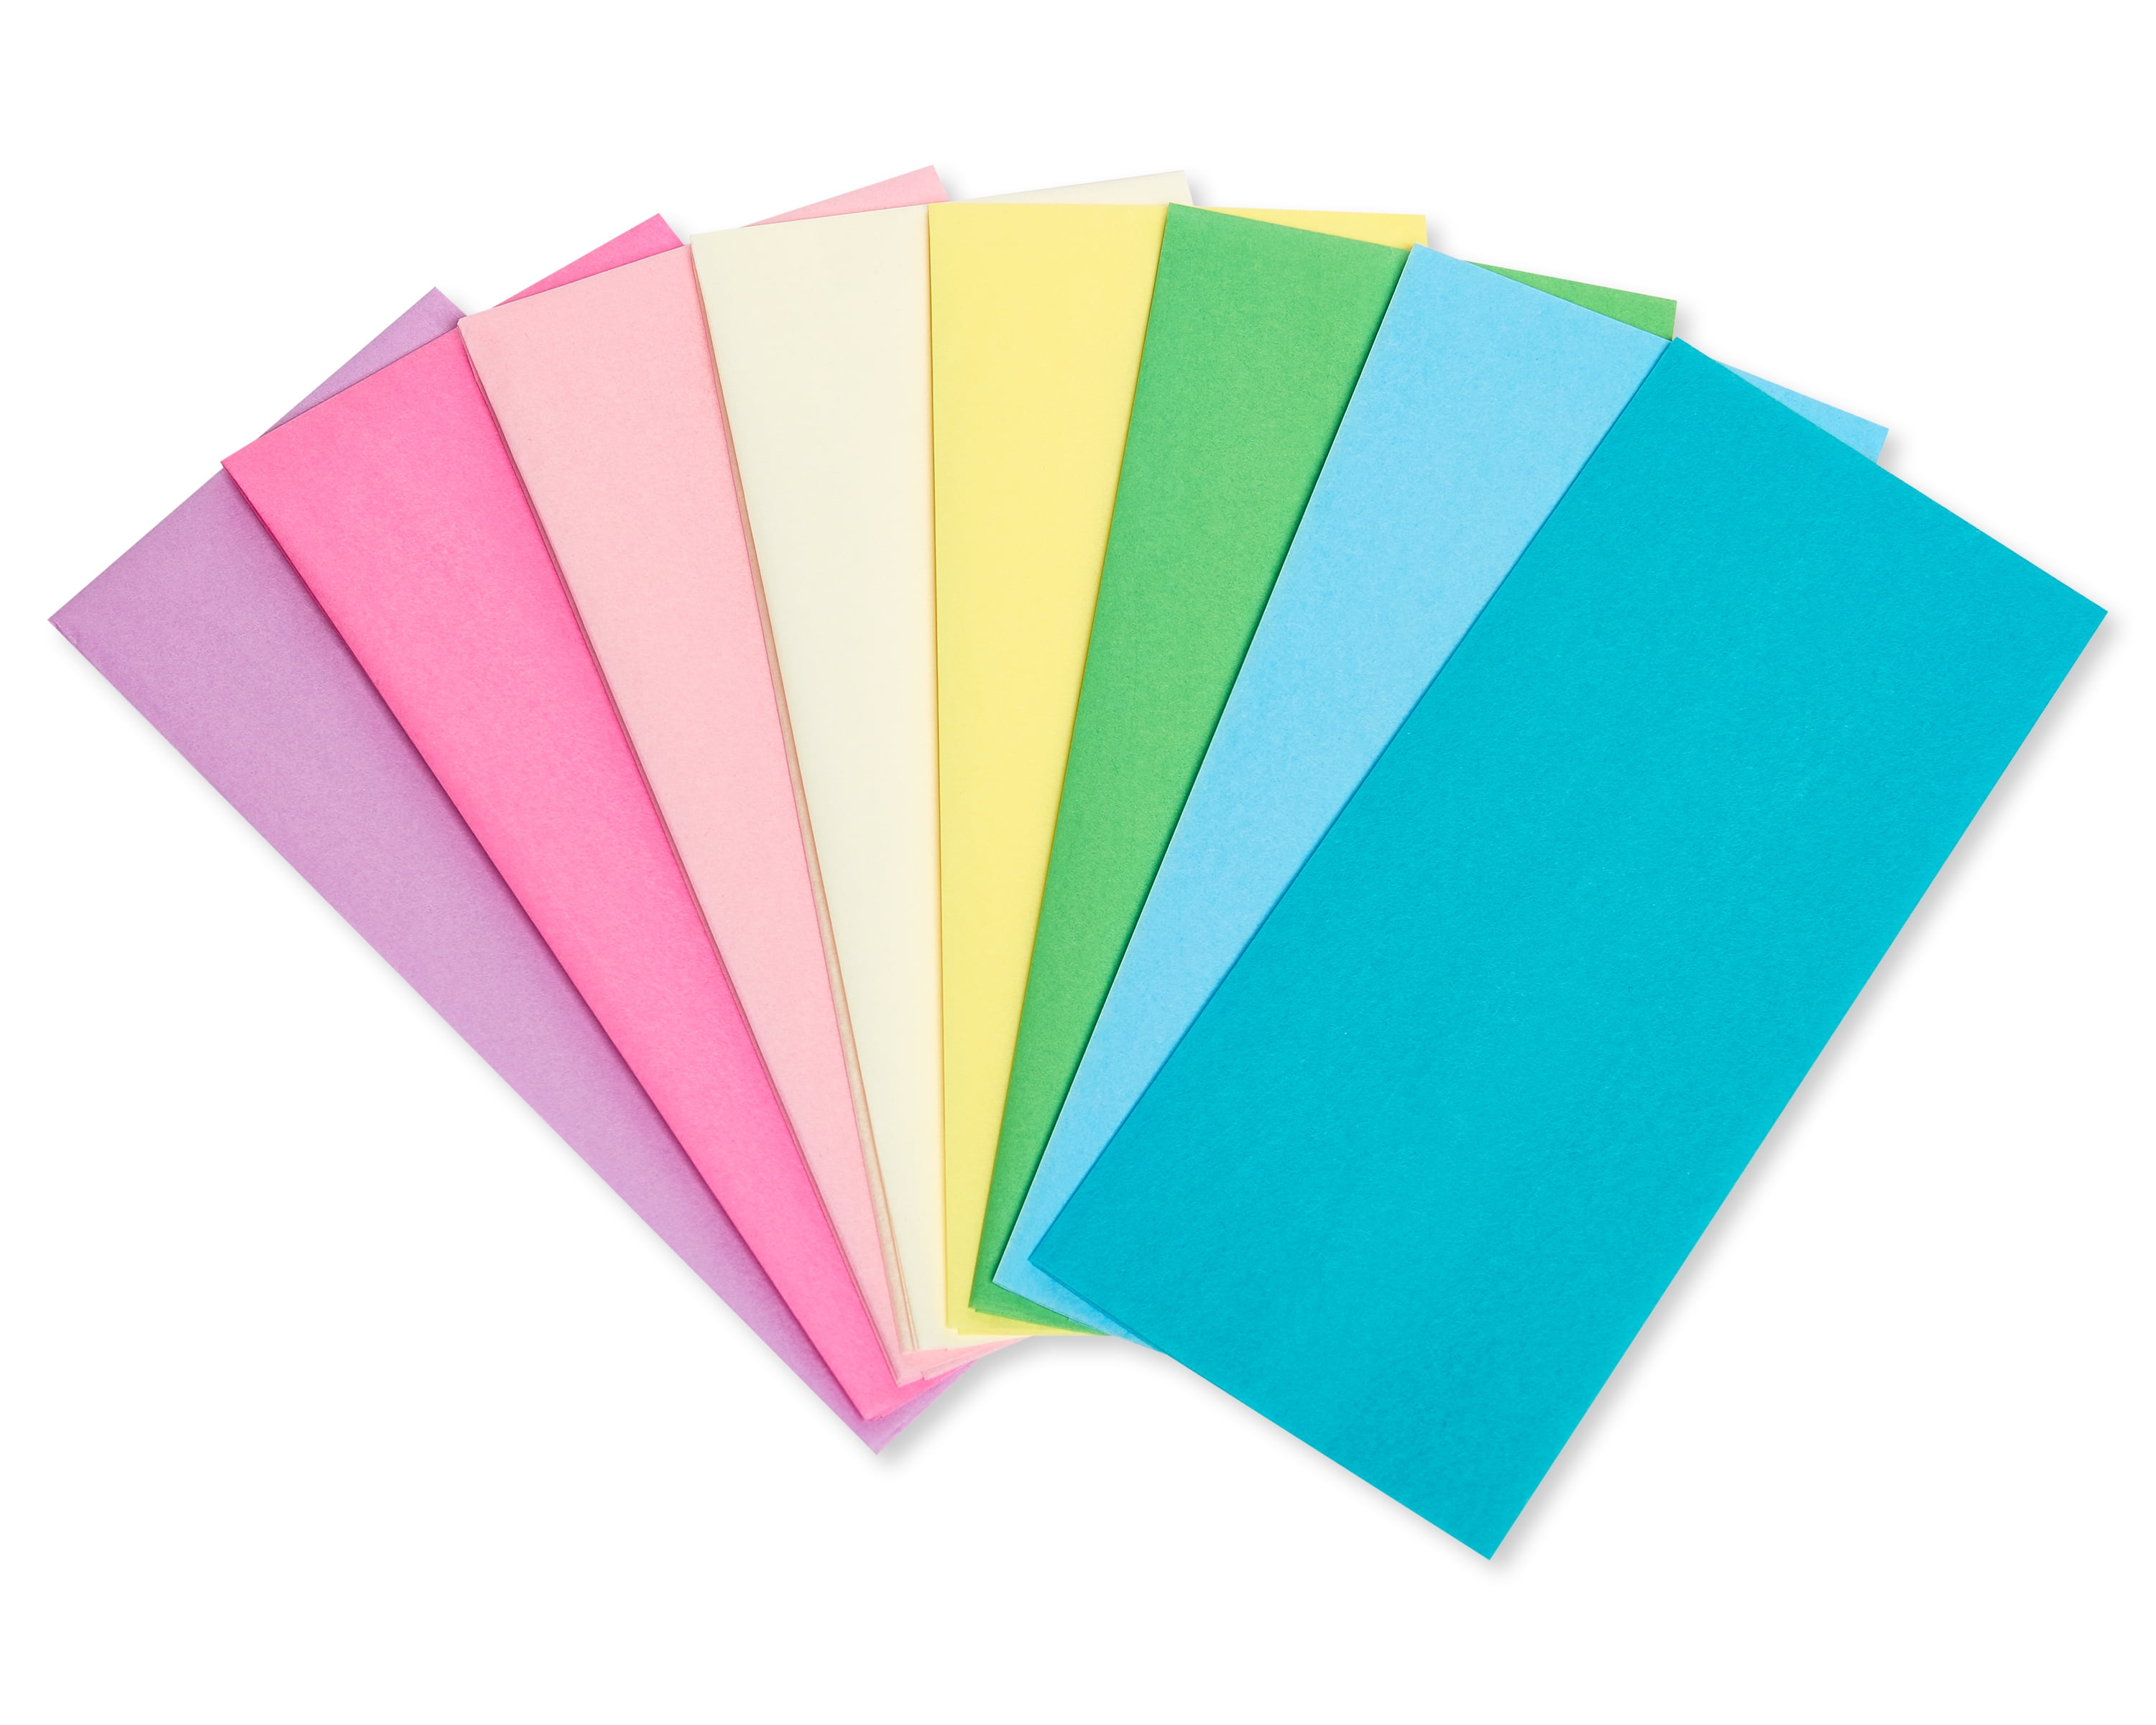 American Greetings 40 Sheet Pastel Tissue Paper 20 x 20 for Graduation,  Birthdays and All Occasions 